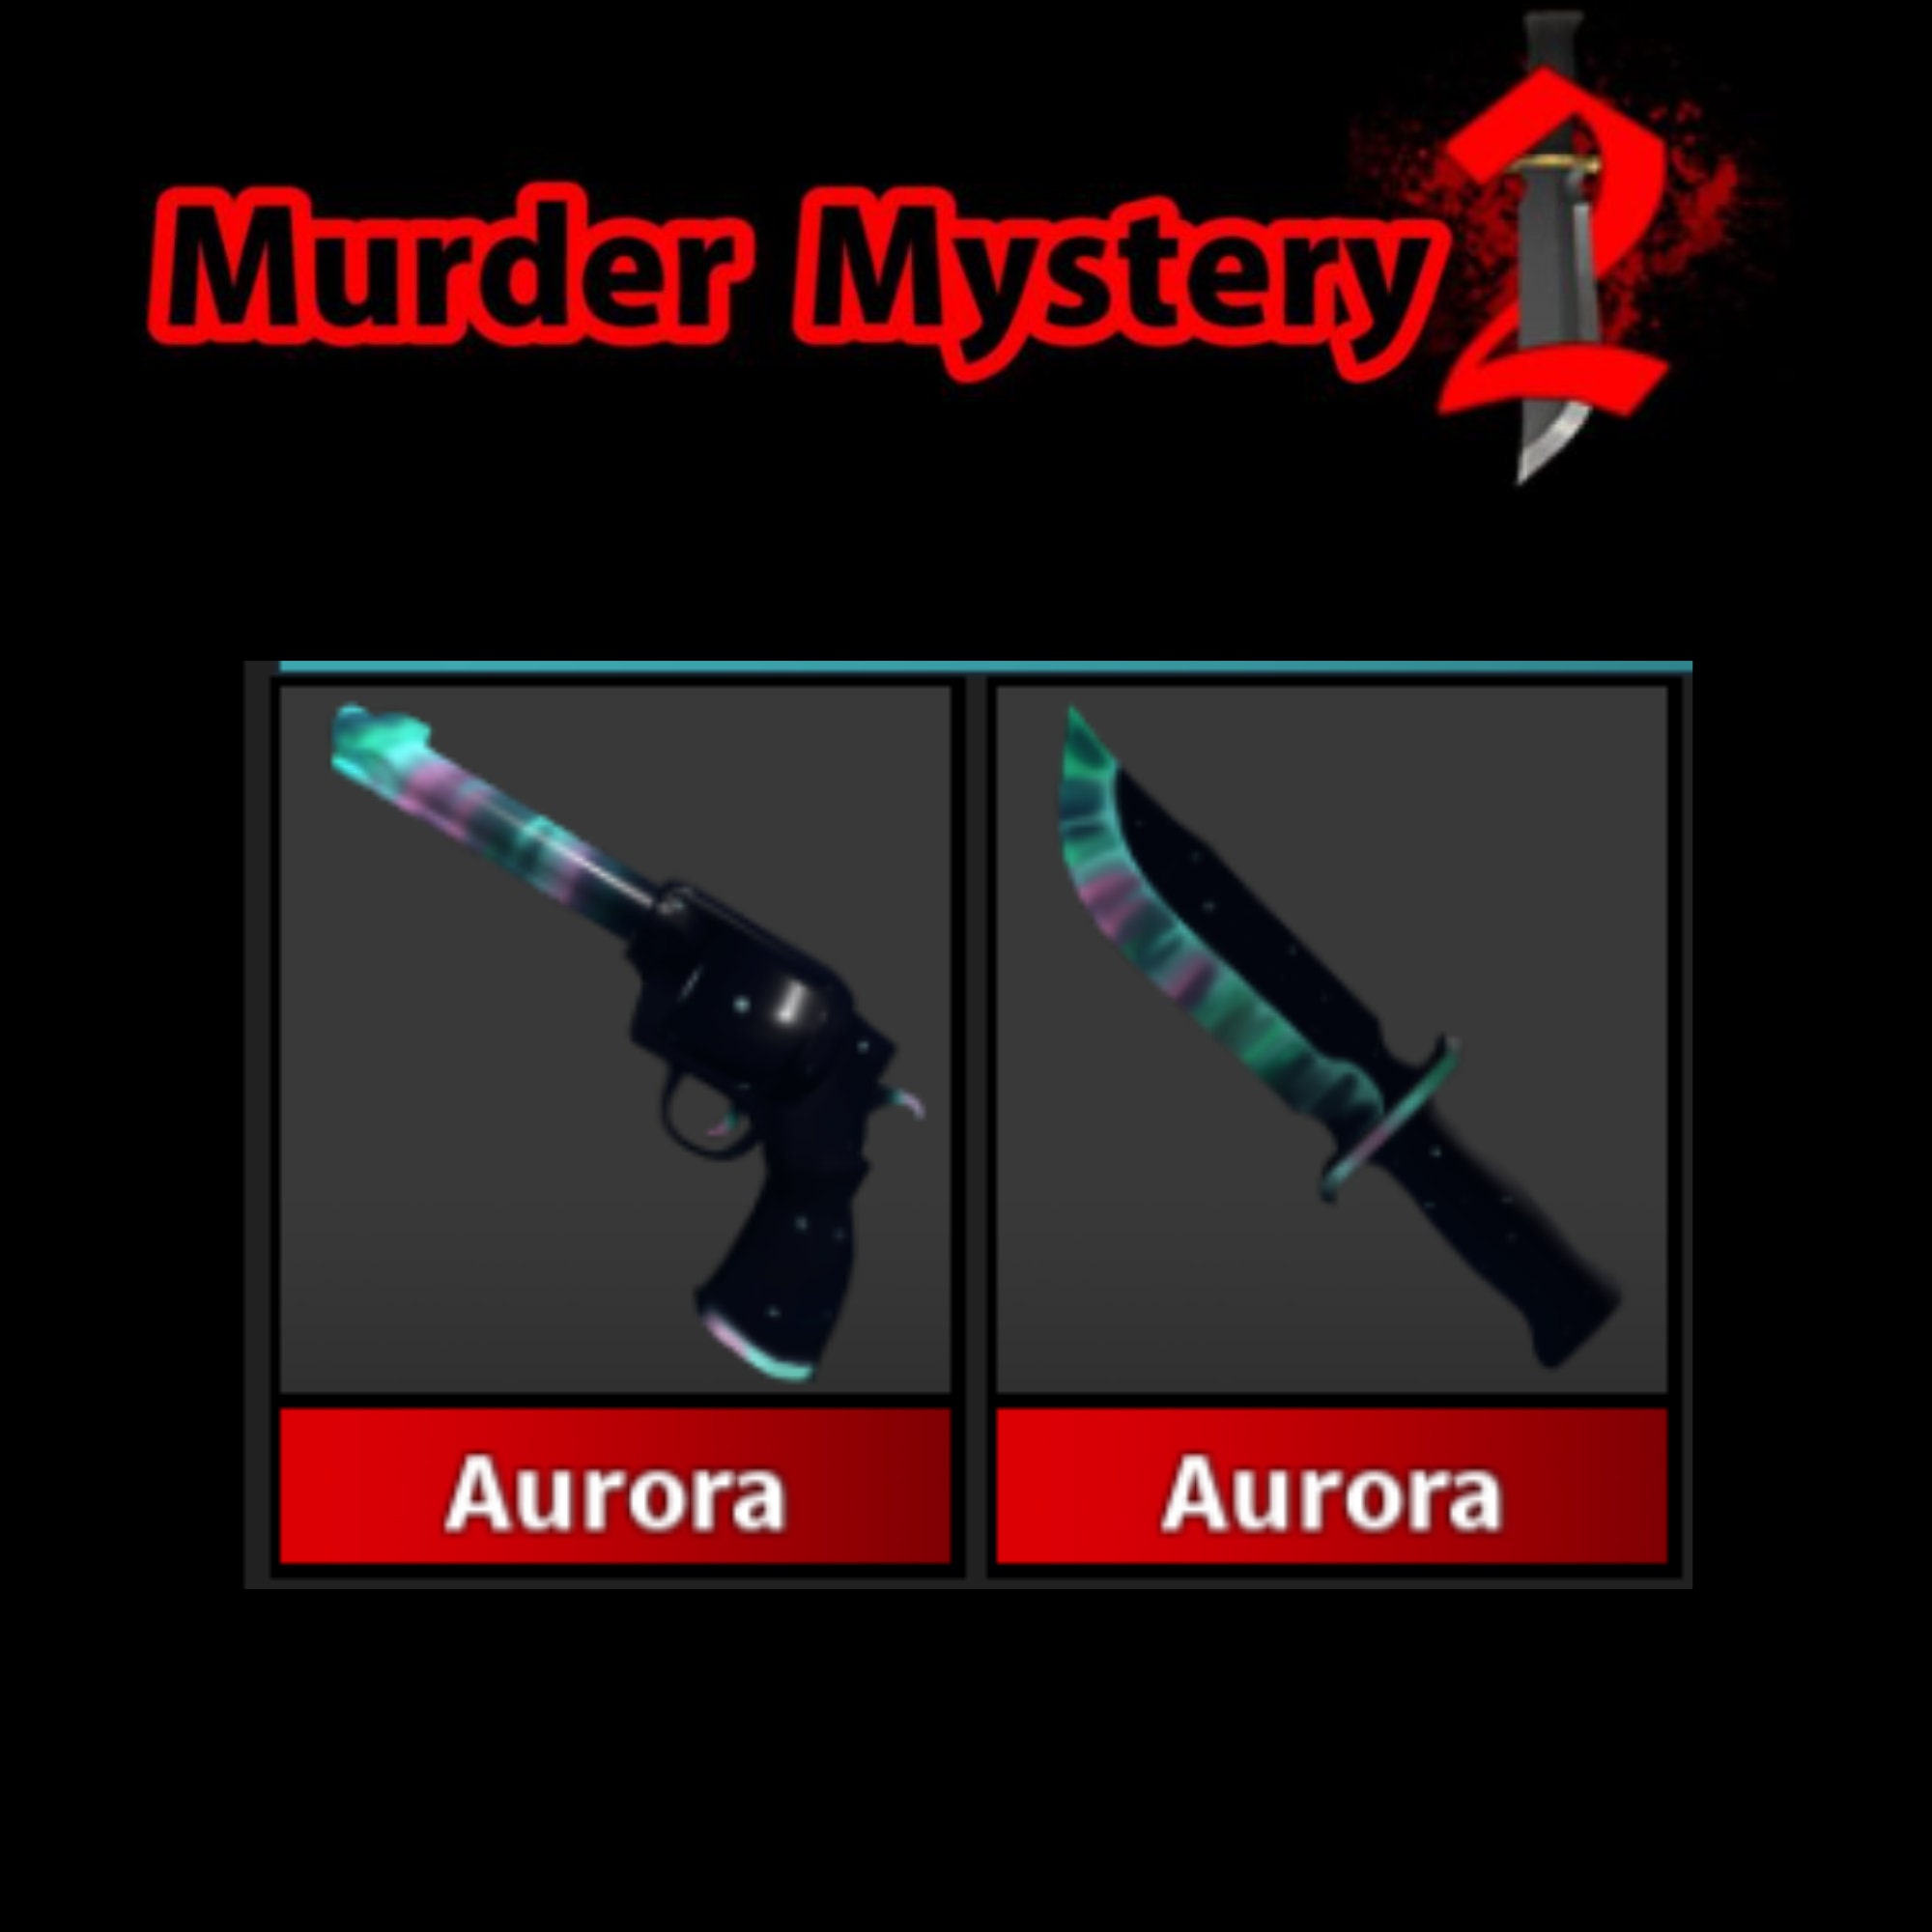 HOW TO GET A FREE GODLY ELDERWOOD REVOLVER!! (ROBLOX MURDER MYSTERY 2) 